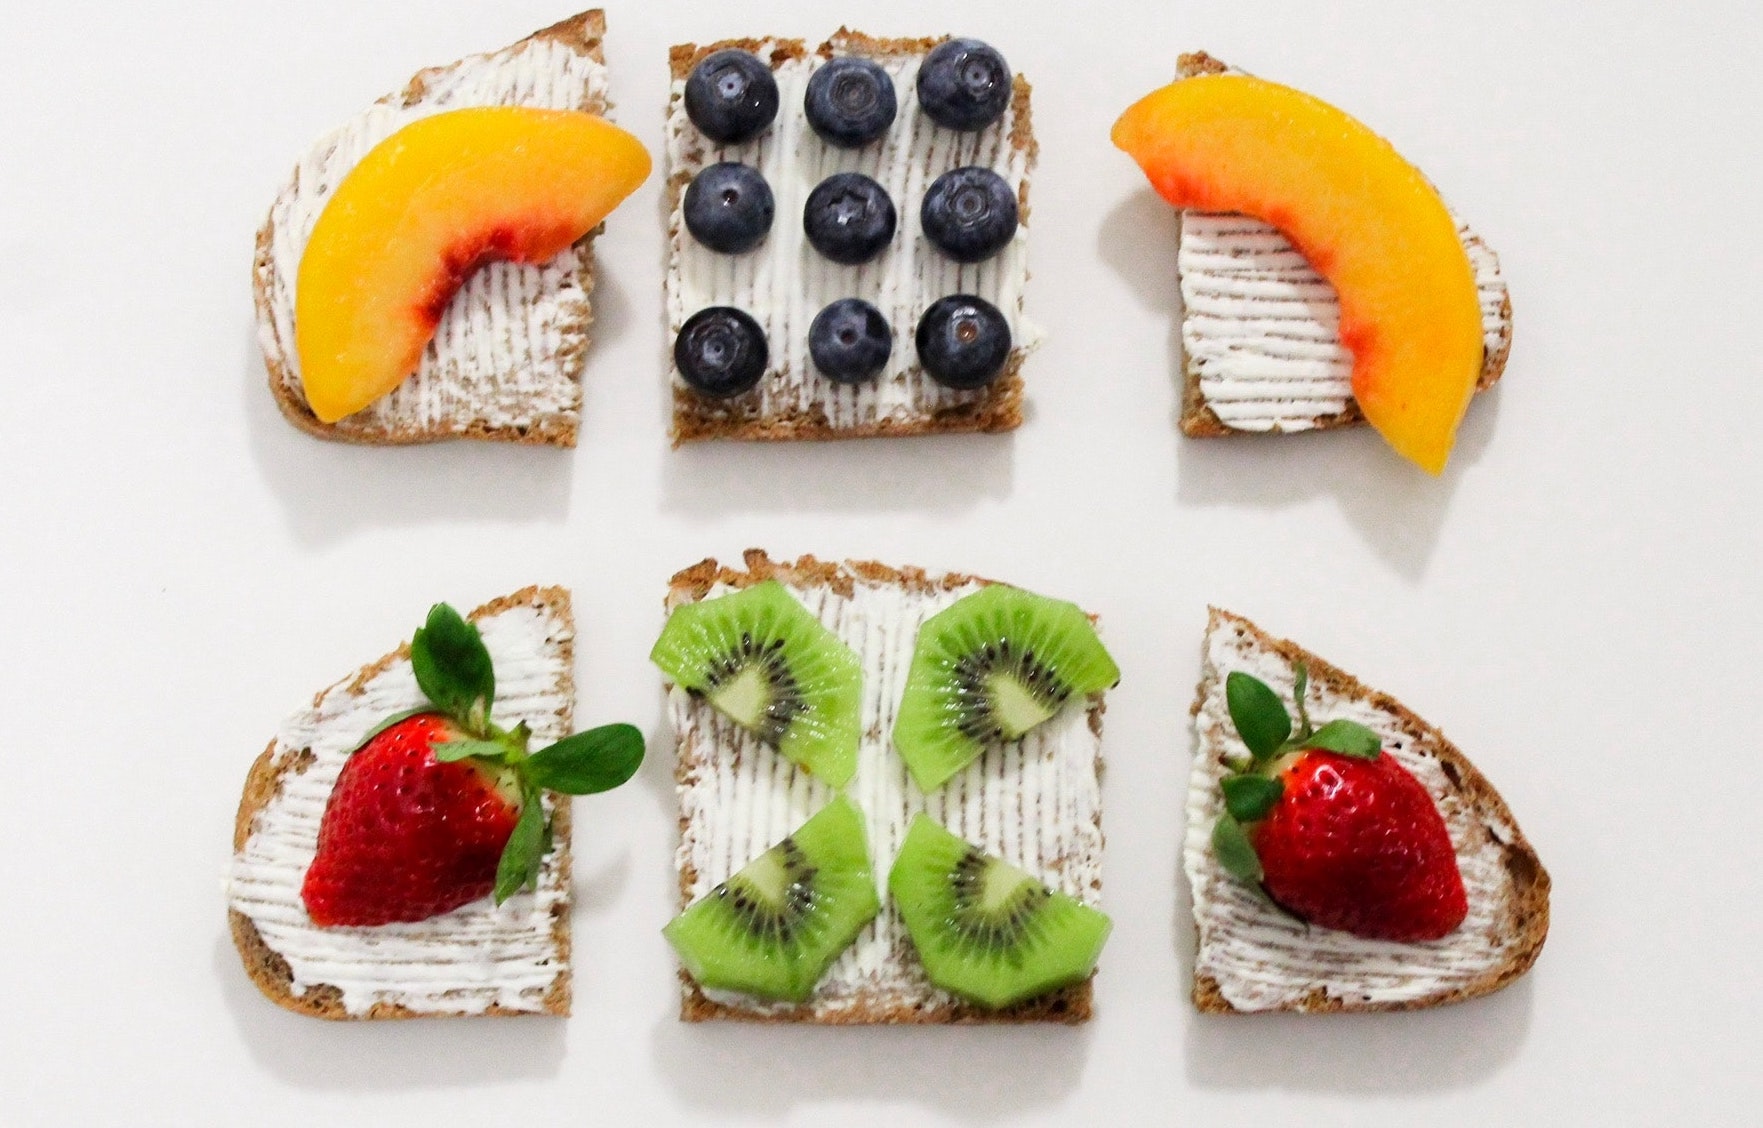 healthy snack ideas for kids